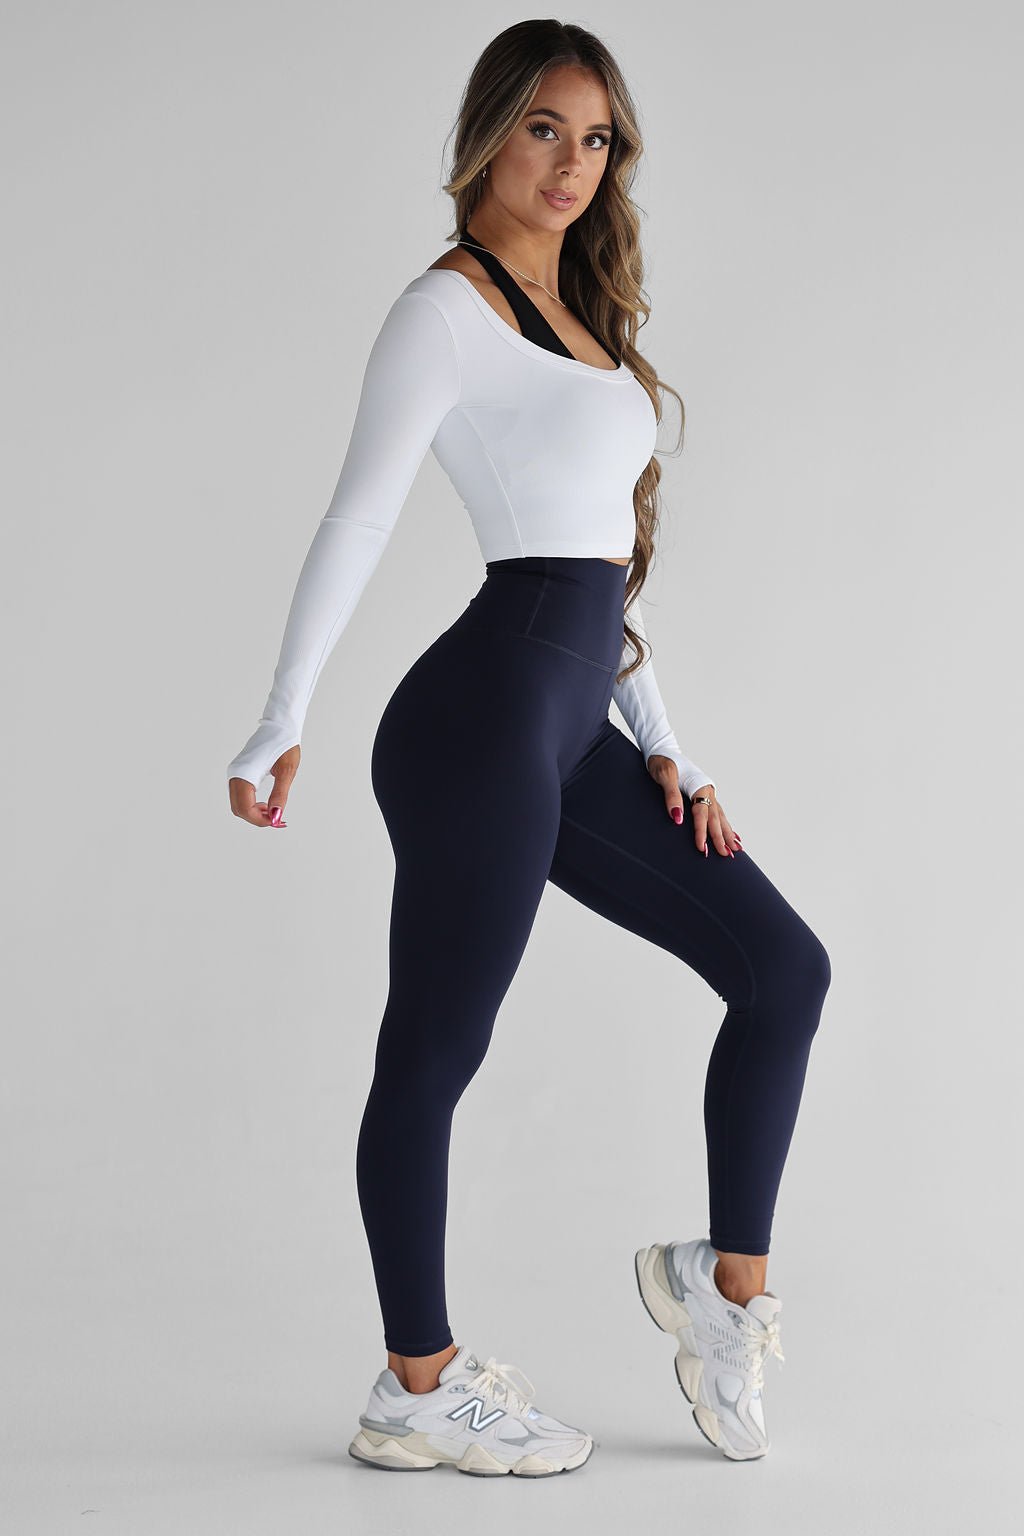 Yocwear Excell High Waisted Blackout Leggings